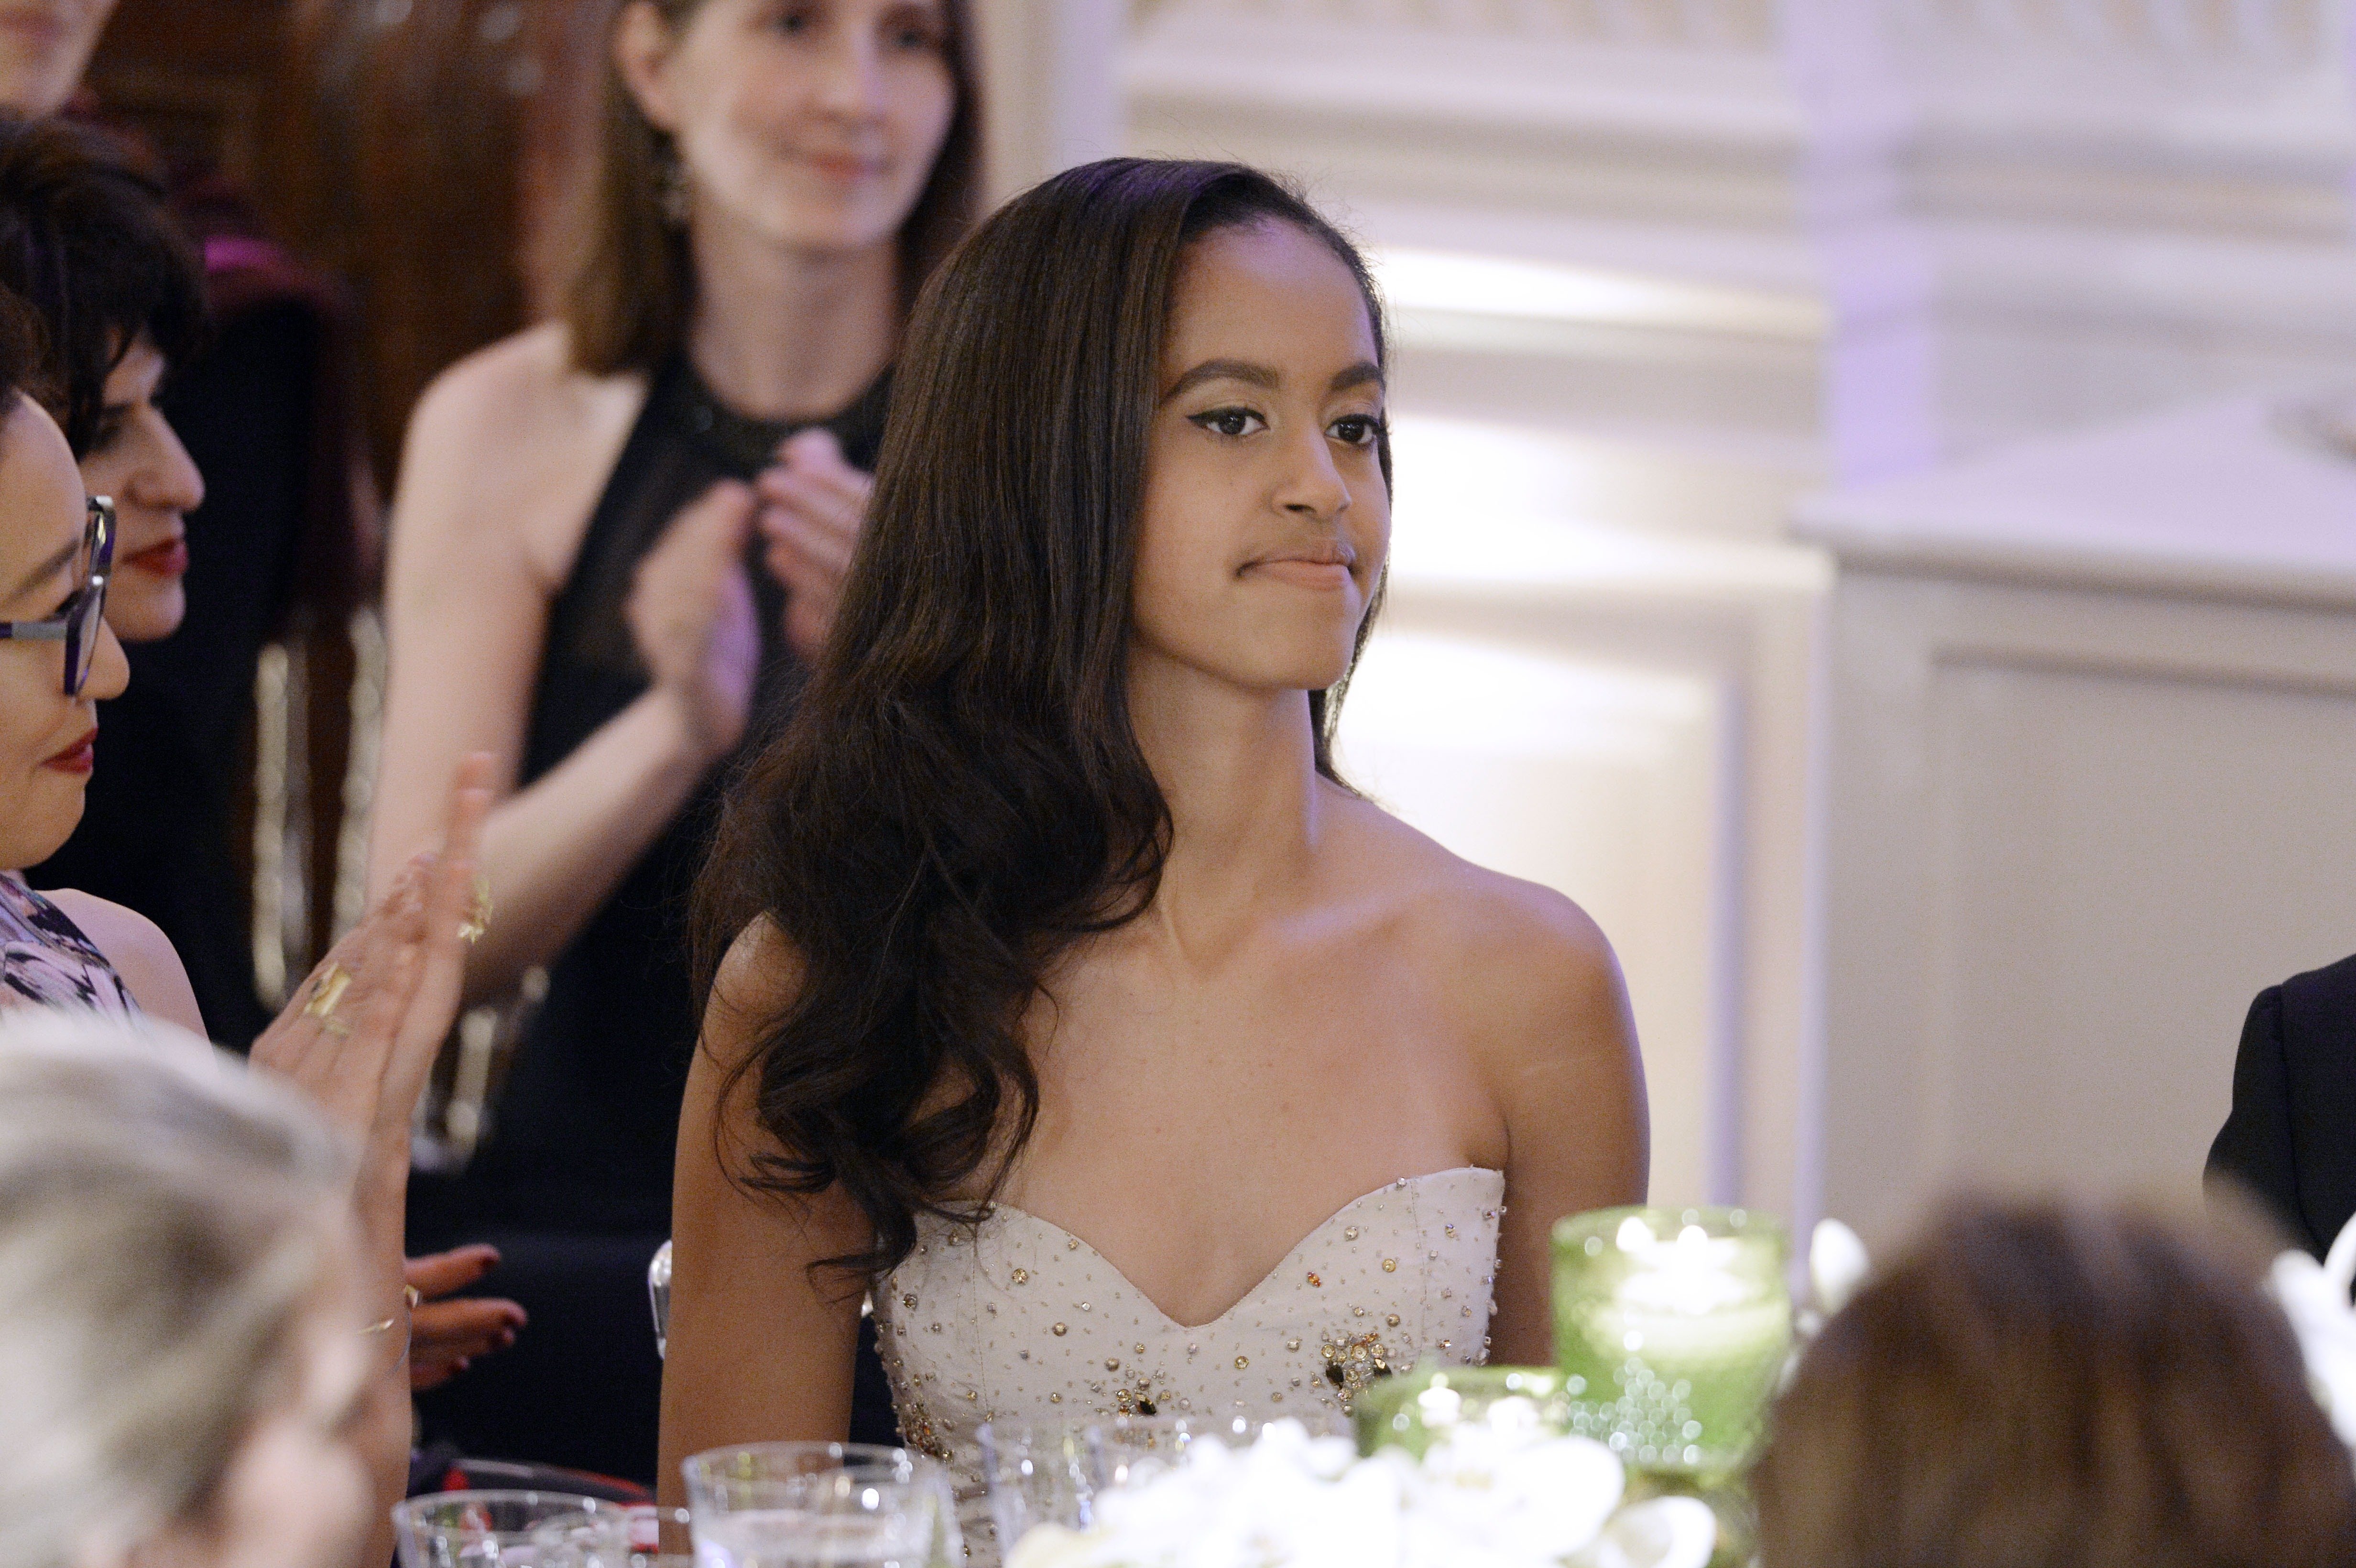 Malia Obama attends a State Dinner at the White House March, 2016. | Photo: GettyImages/Global Images of Ukraine